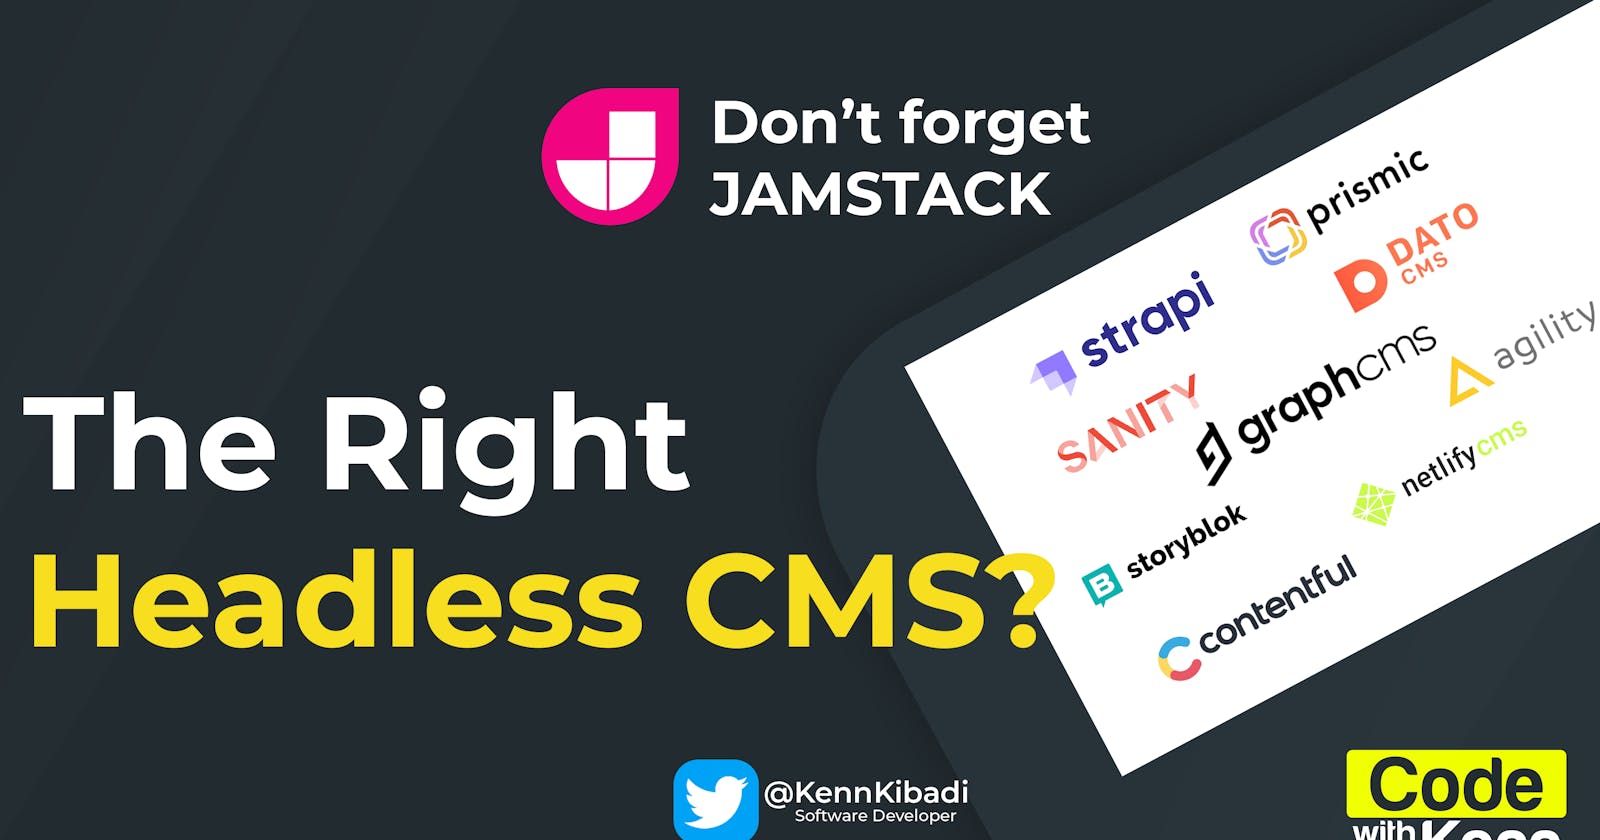 What is the Right Headless CMS?